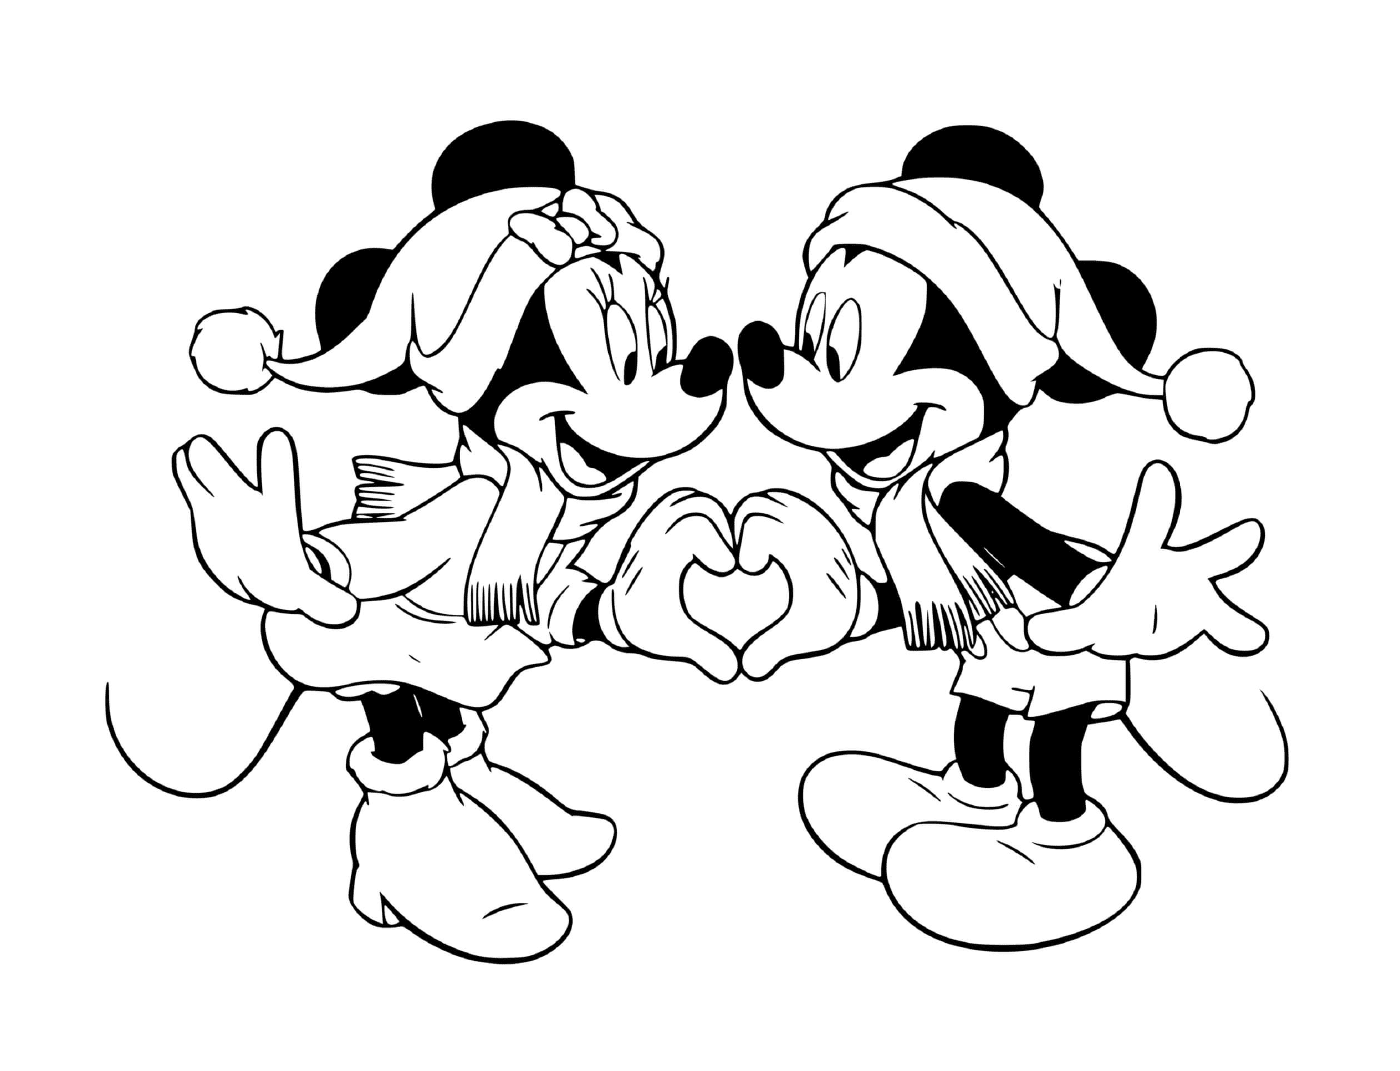  Mickey and Minnie form a heart 